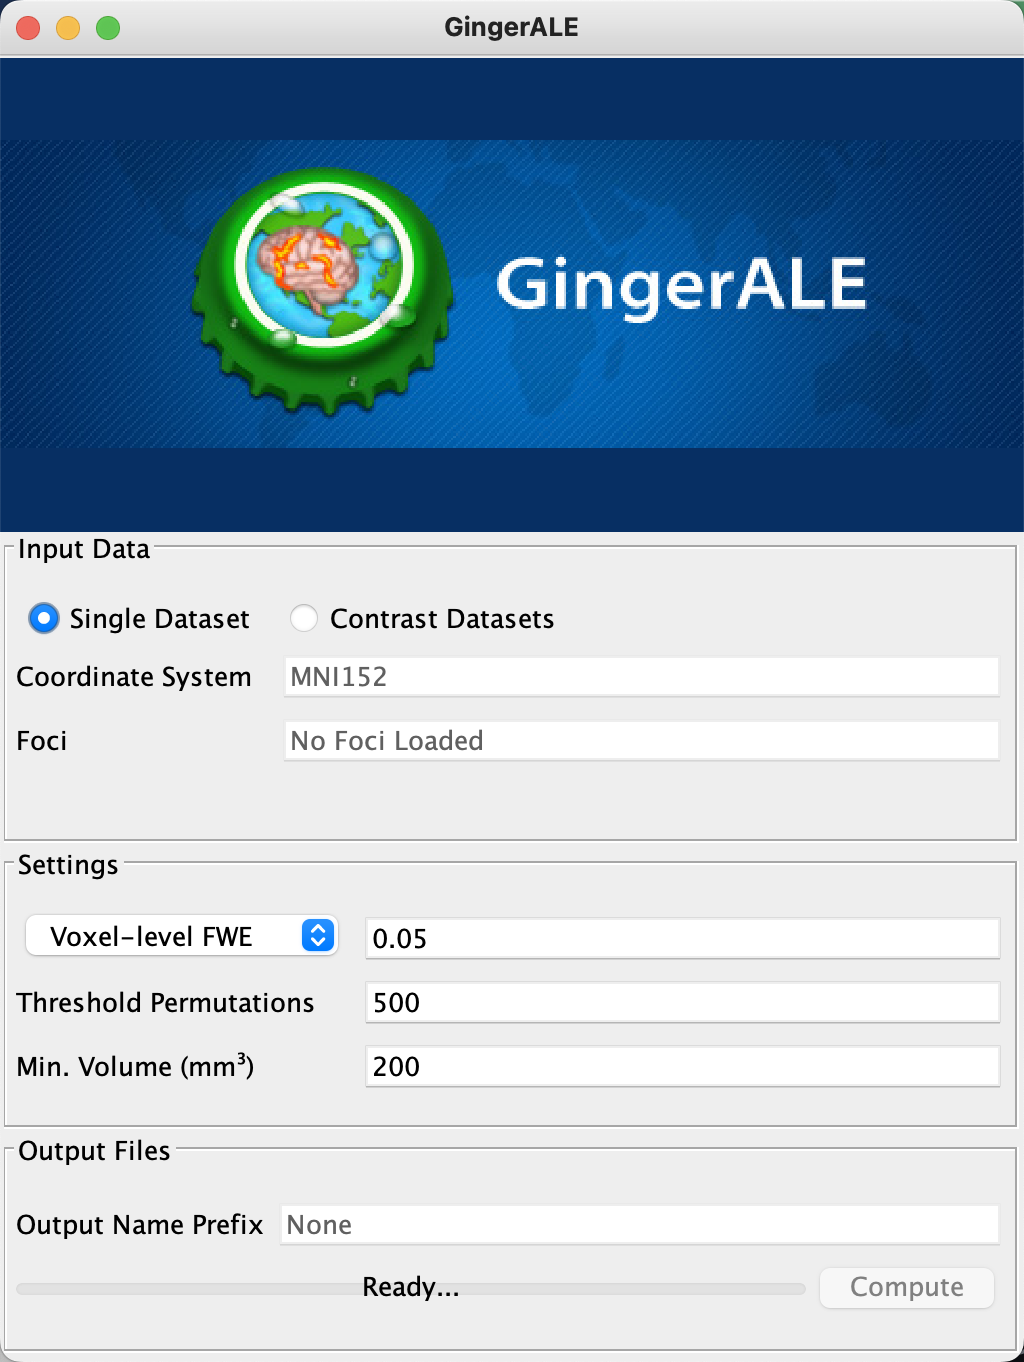 ../../_images/GingerALE_01_Interface.png